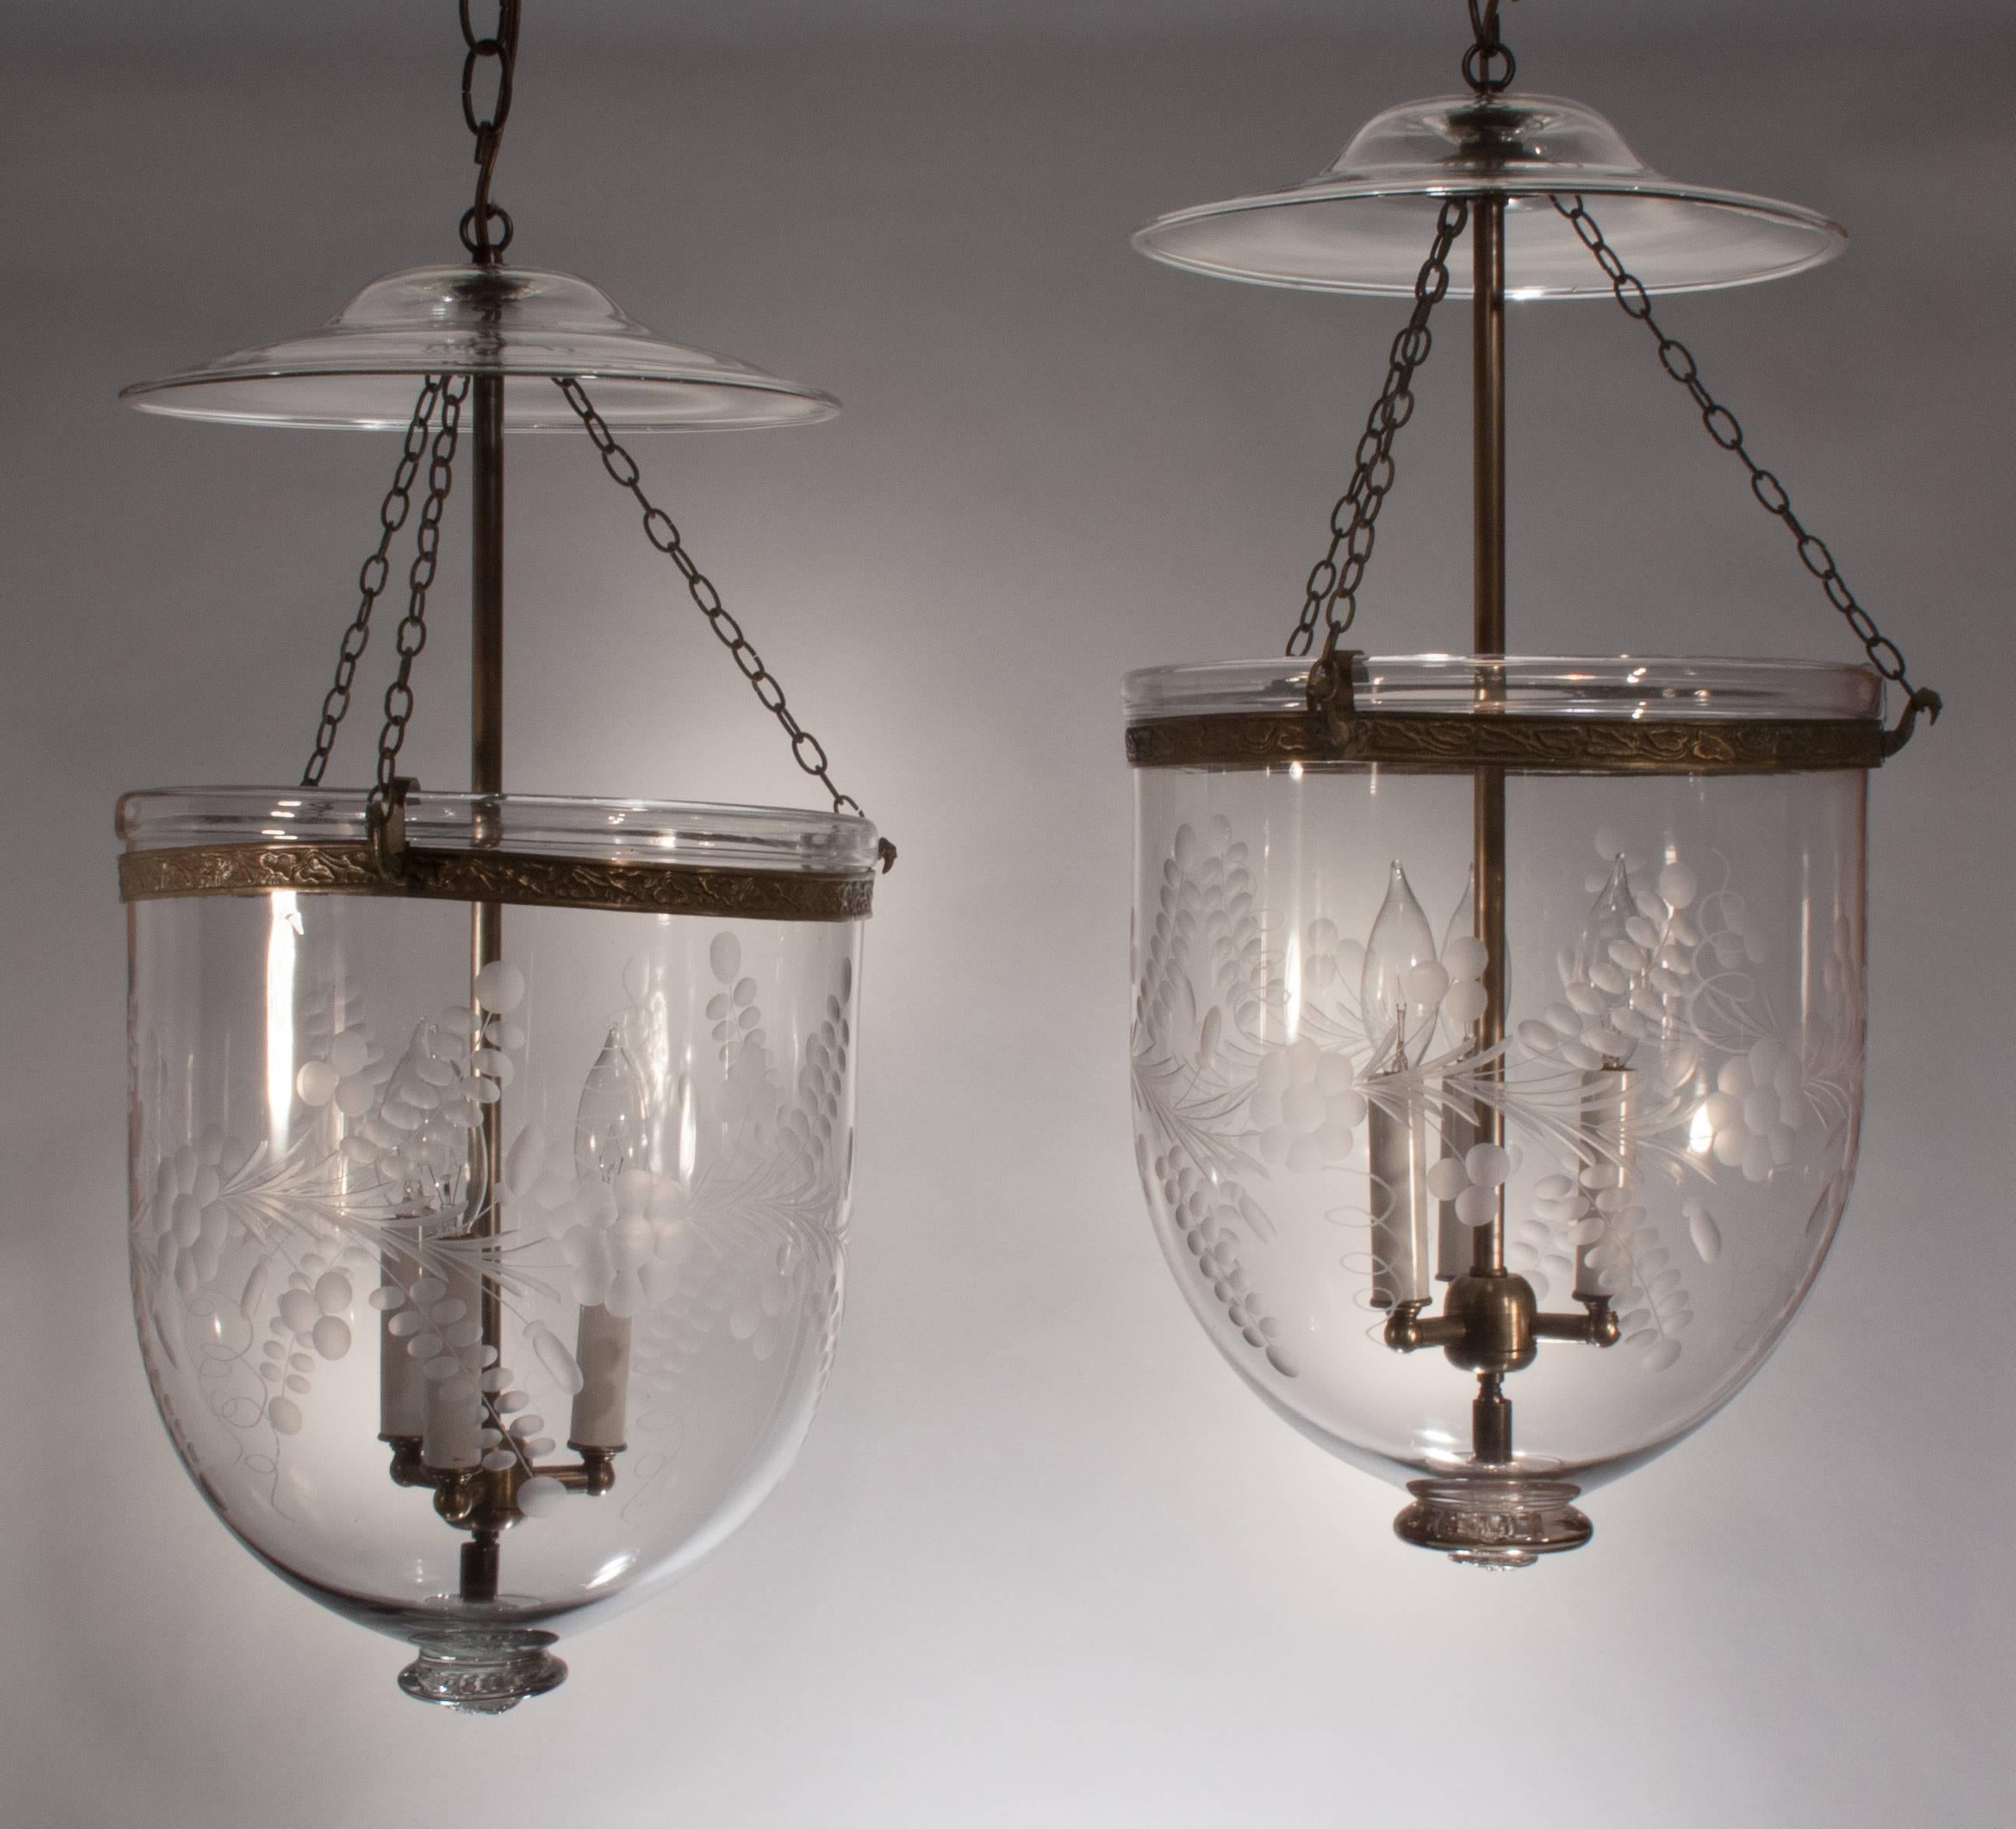 Pair of large English bell jar hall lanterns, circa 1880, with etched floral and vine design. These handblown glass pendants have their original smoke bells and decorative brass bands. The bell jars are newly electrified, each with a three-bulb